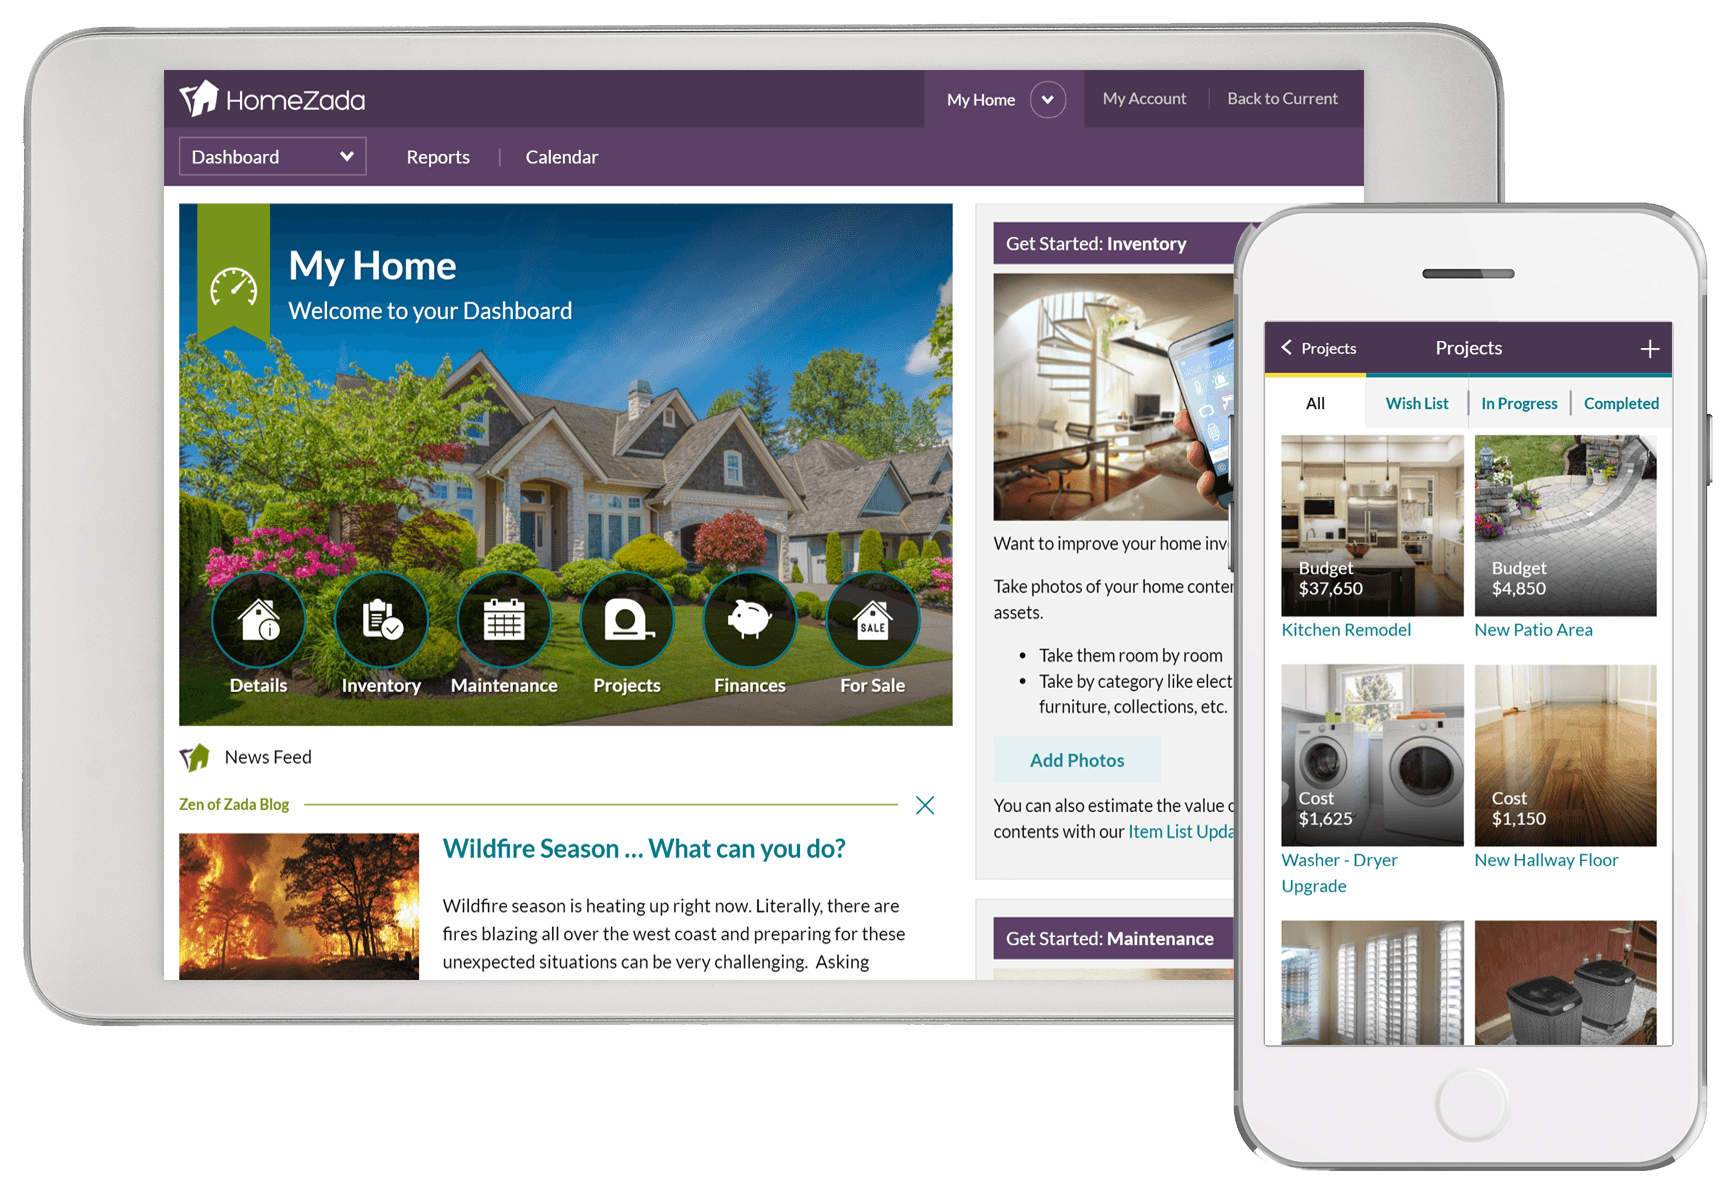 Homezada home management intro to buyers